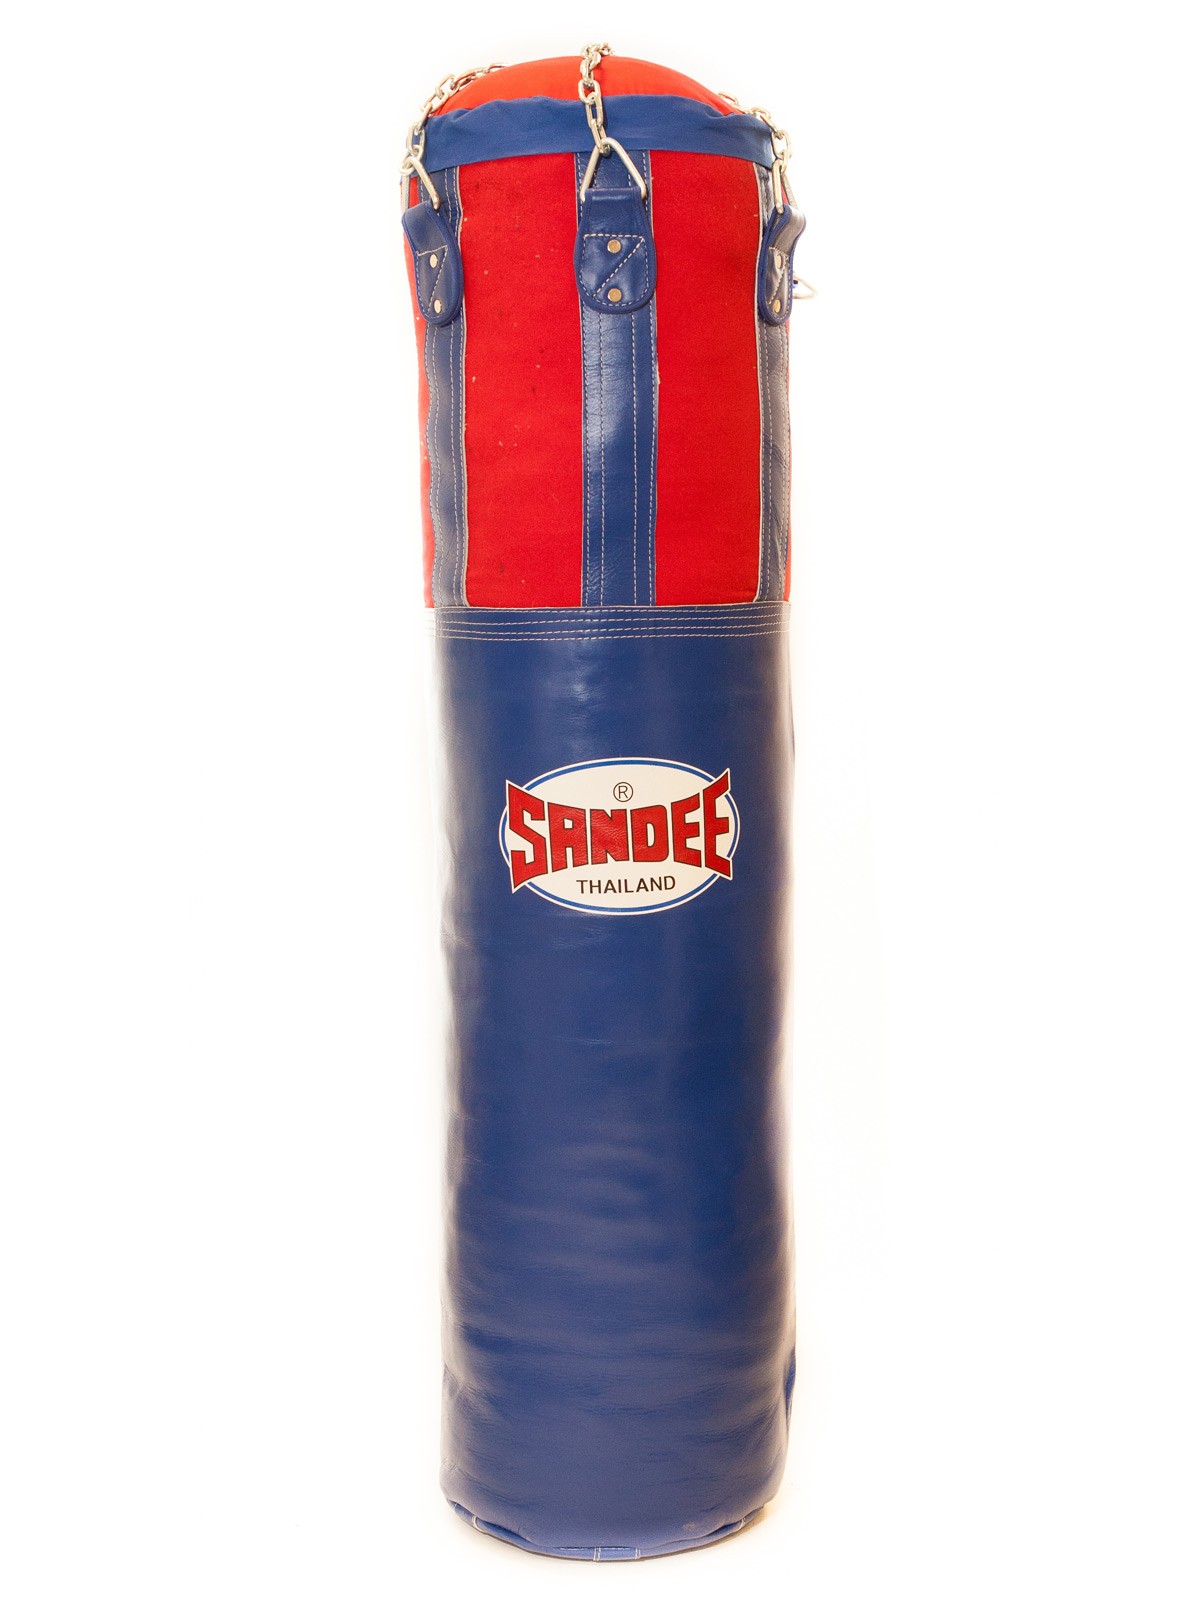 Sandee Punch Bag Boxing Kicking Punching Half Leather Blue & Red 